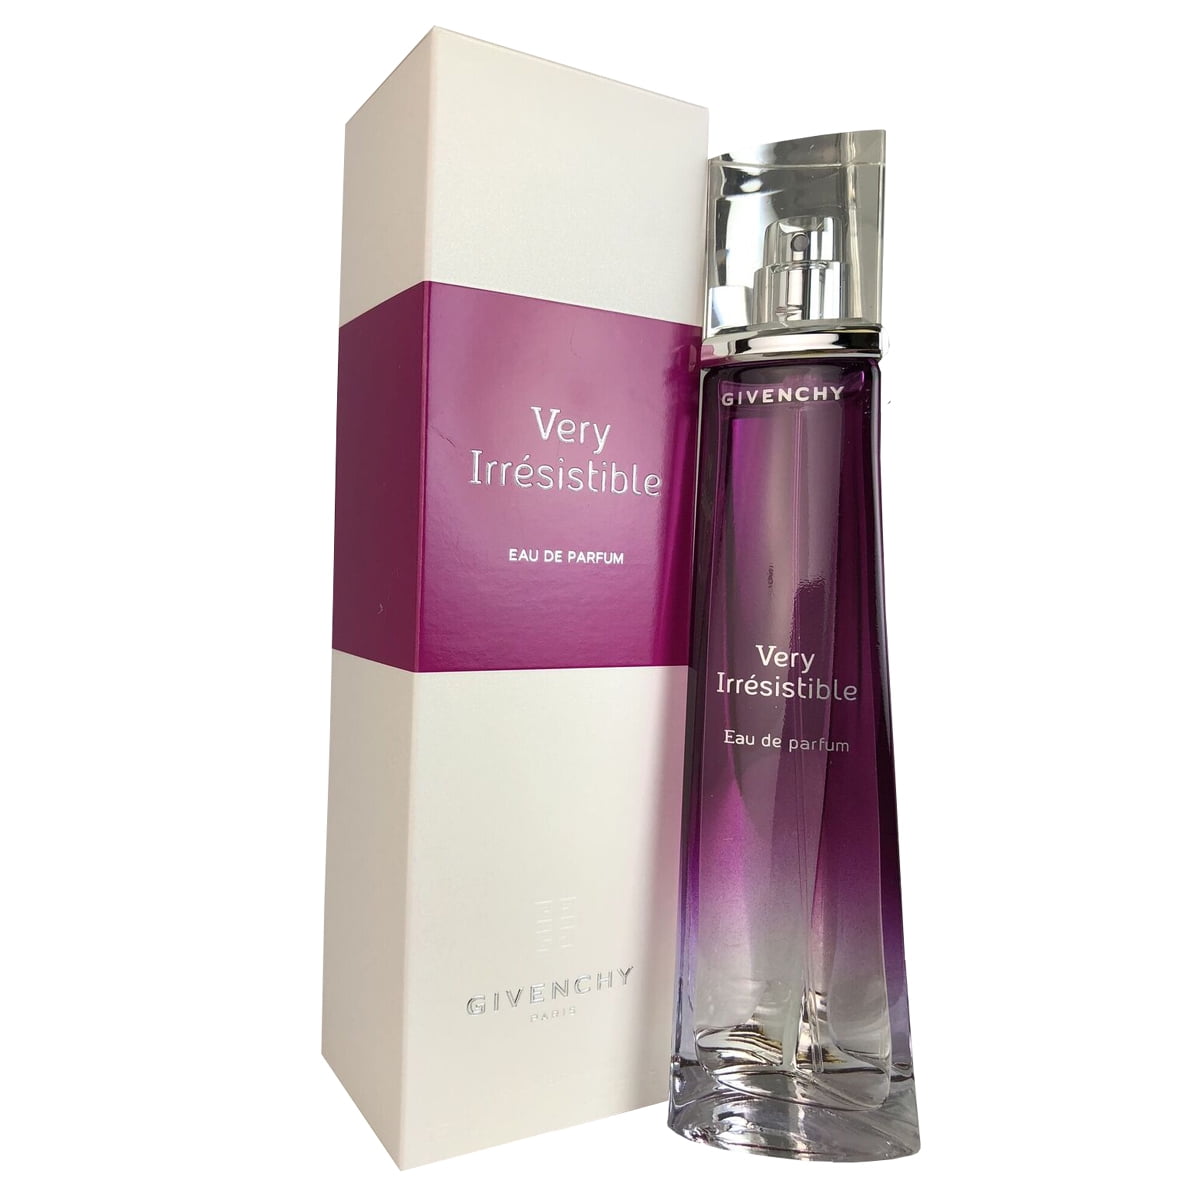  Very Irresistible By Givenchy For Women. Eau De Toilette Spray  2.5 Ounces : Beauty & Personal Care